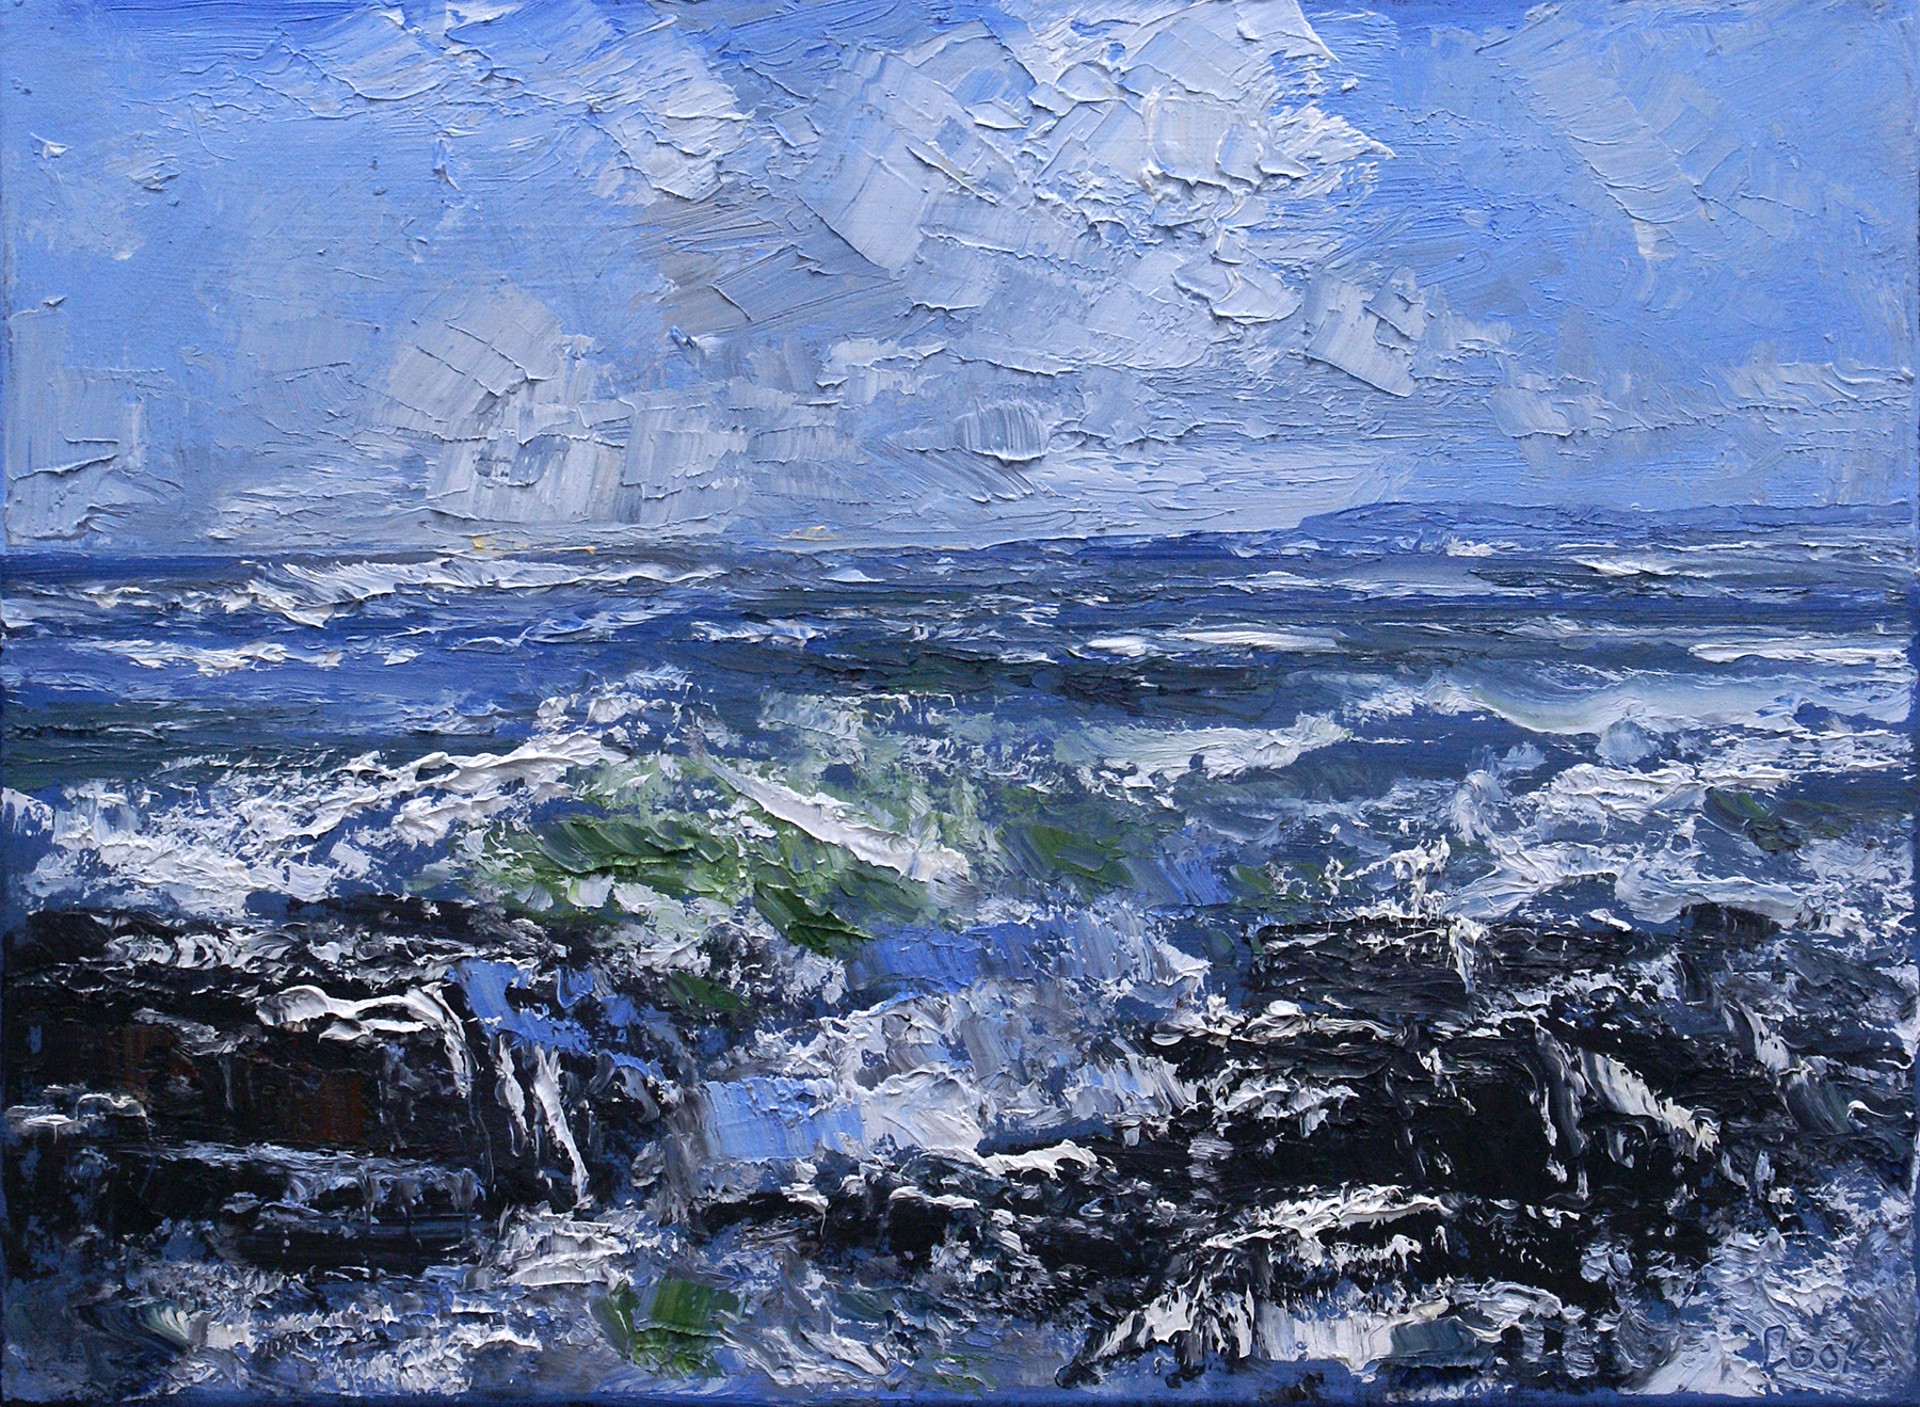 Casco Bay Study #3 by James Cook